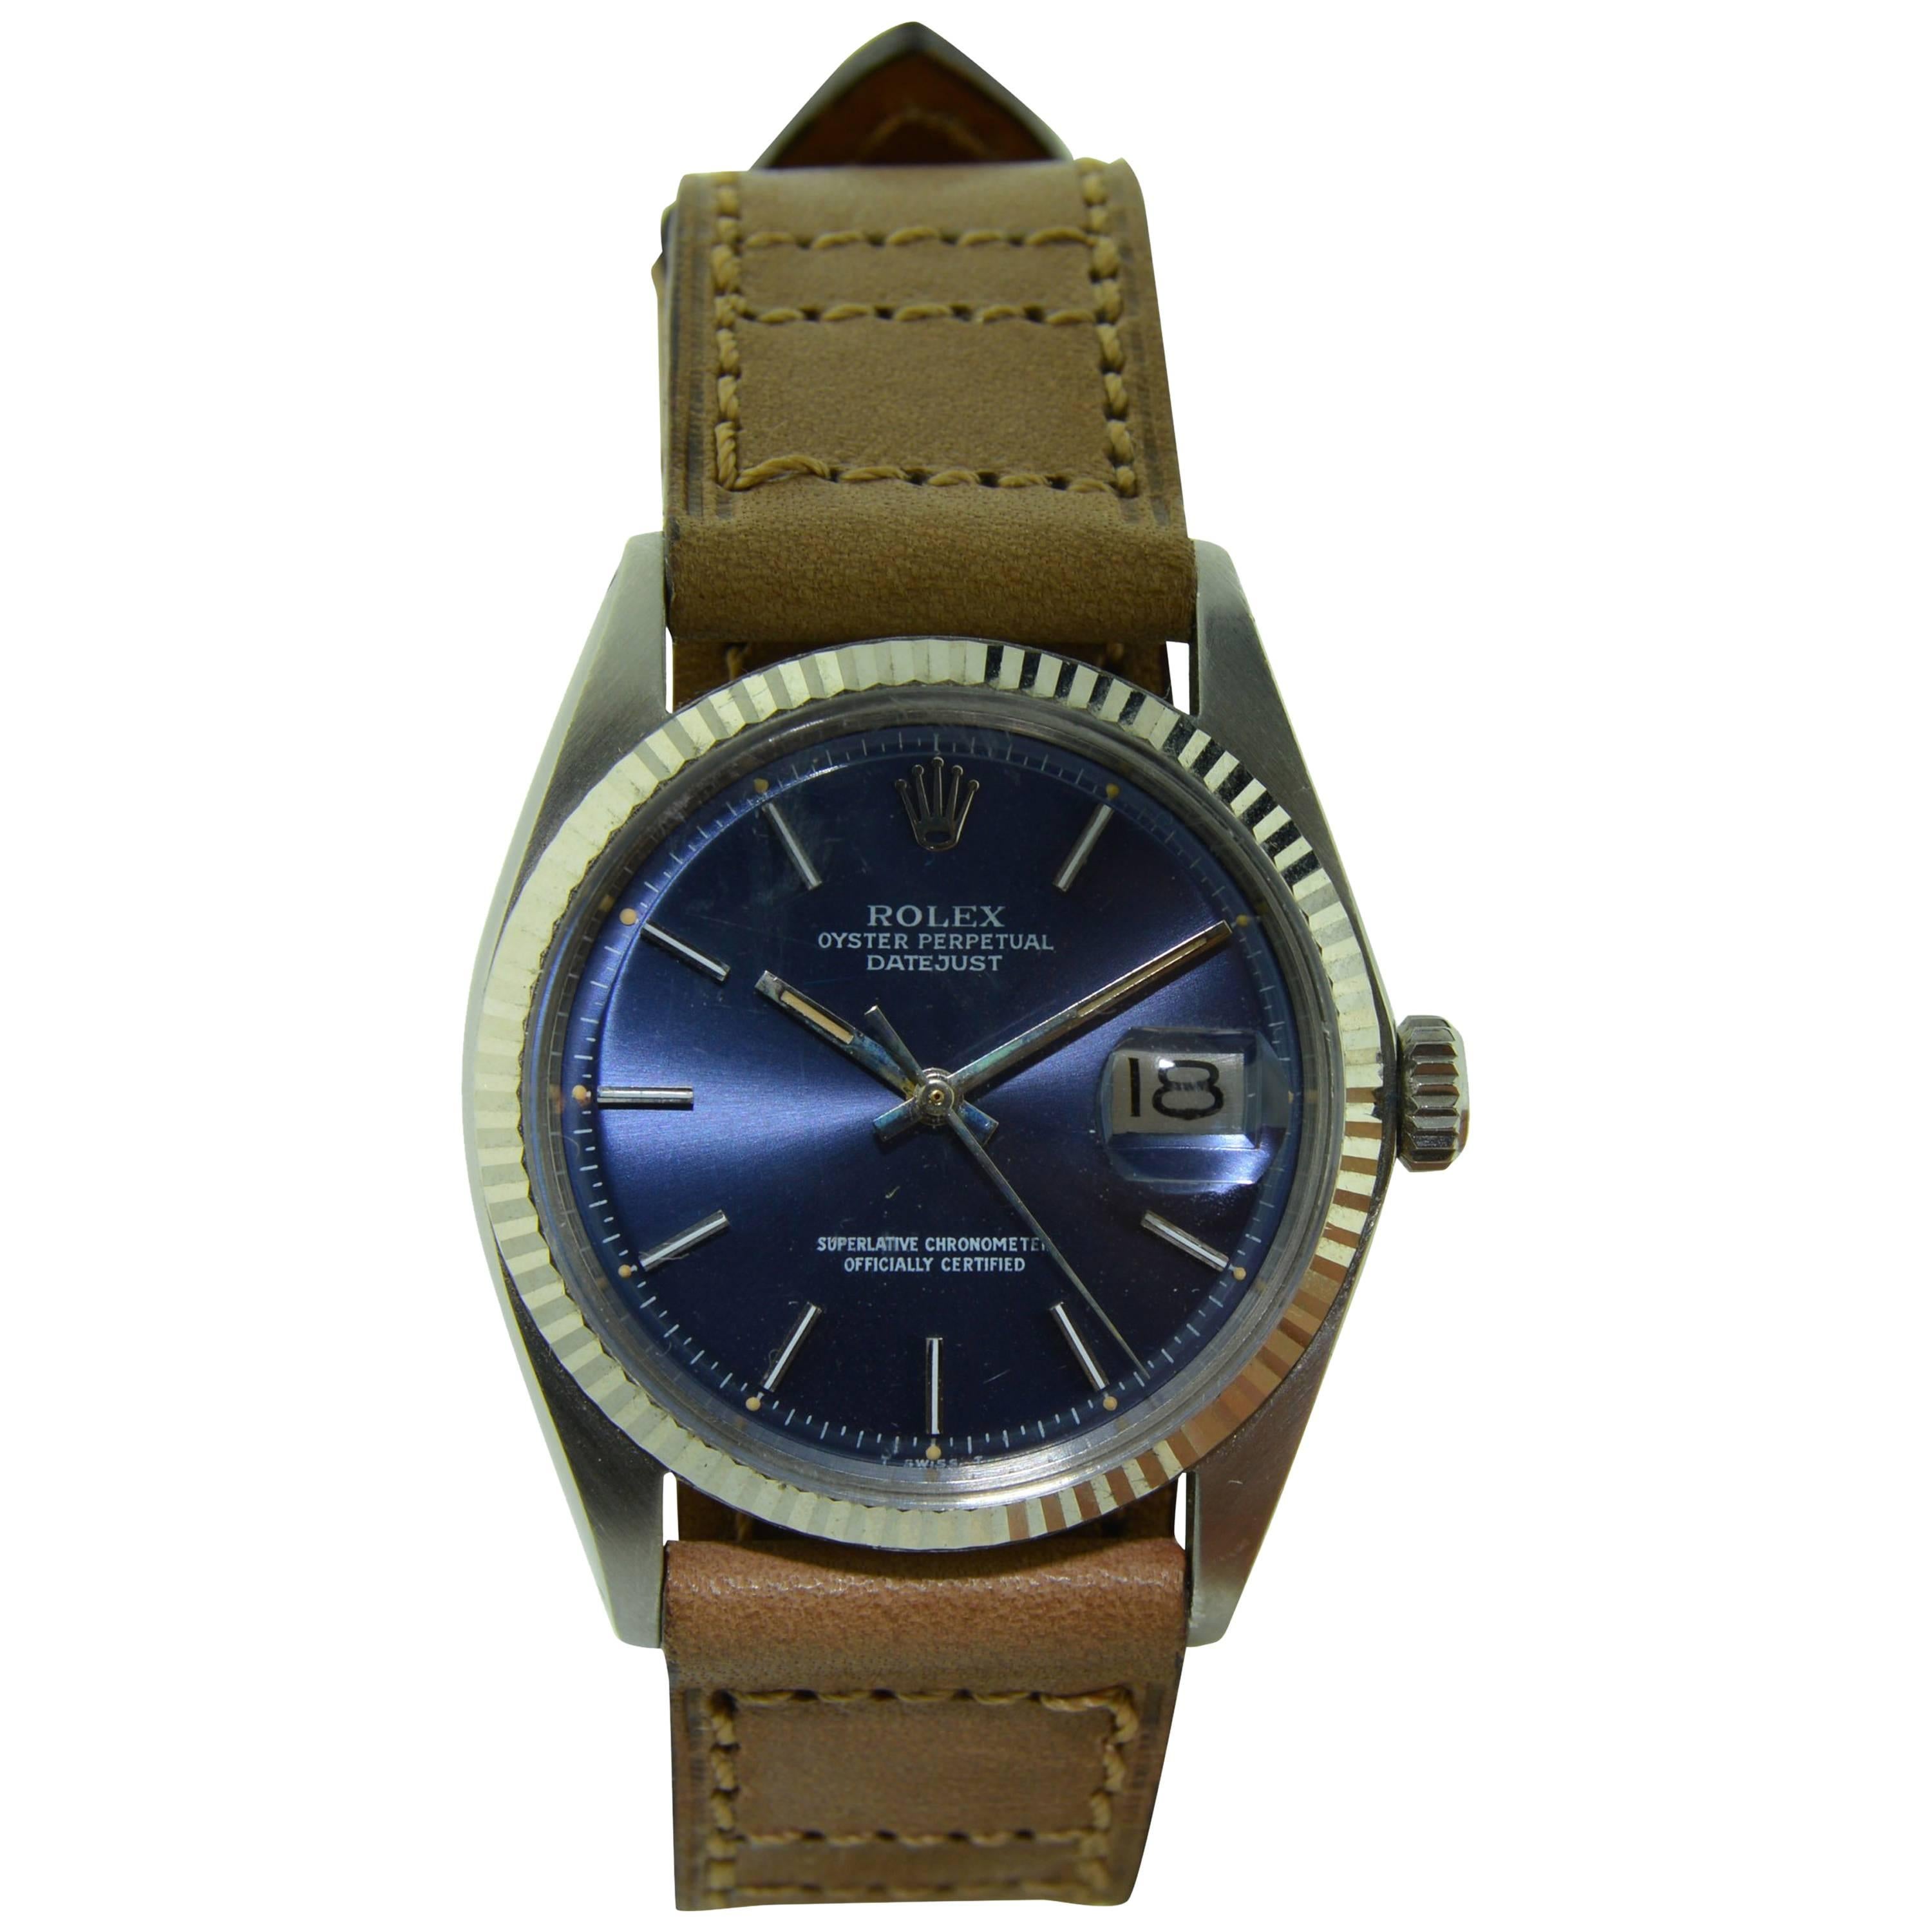 Rolex Stainless Steel Datejust Blue Dial Perpetual Wind Watch, 1970s